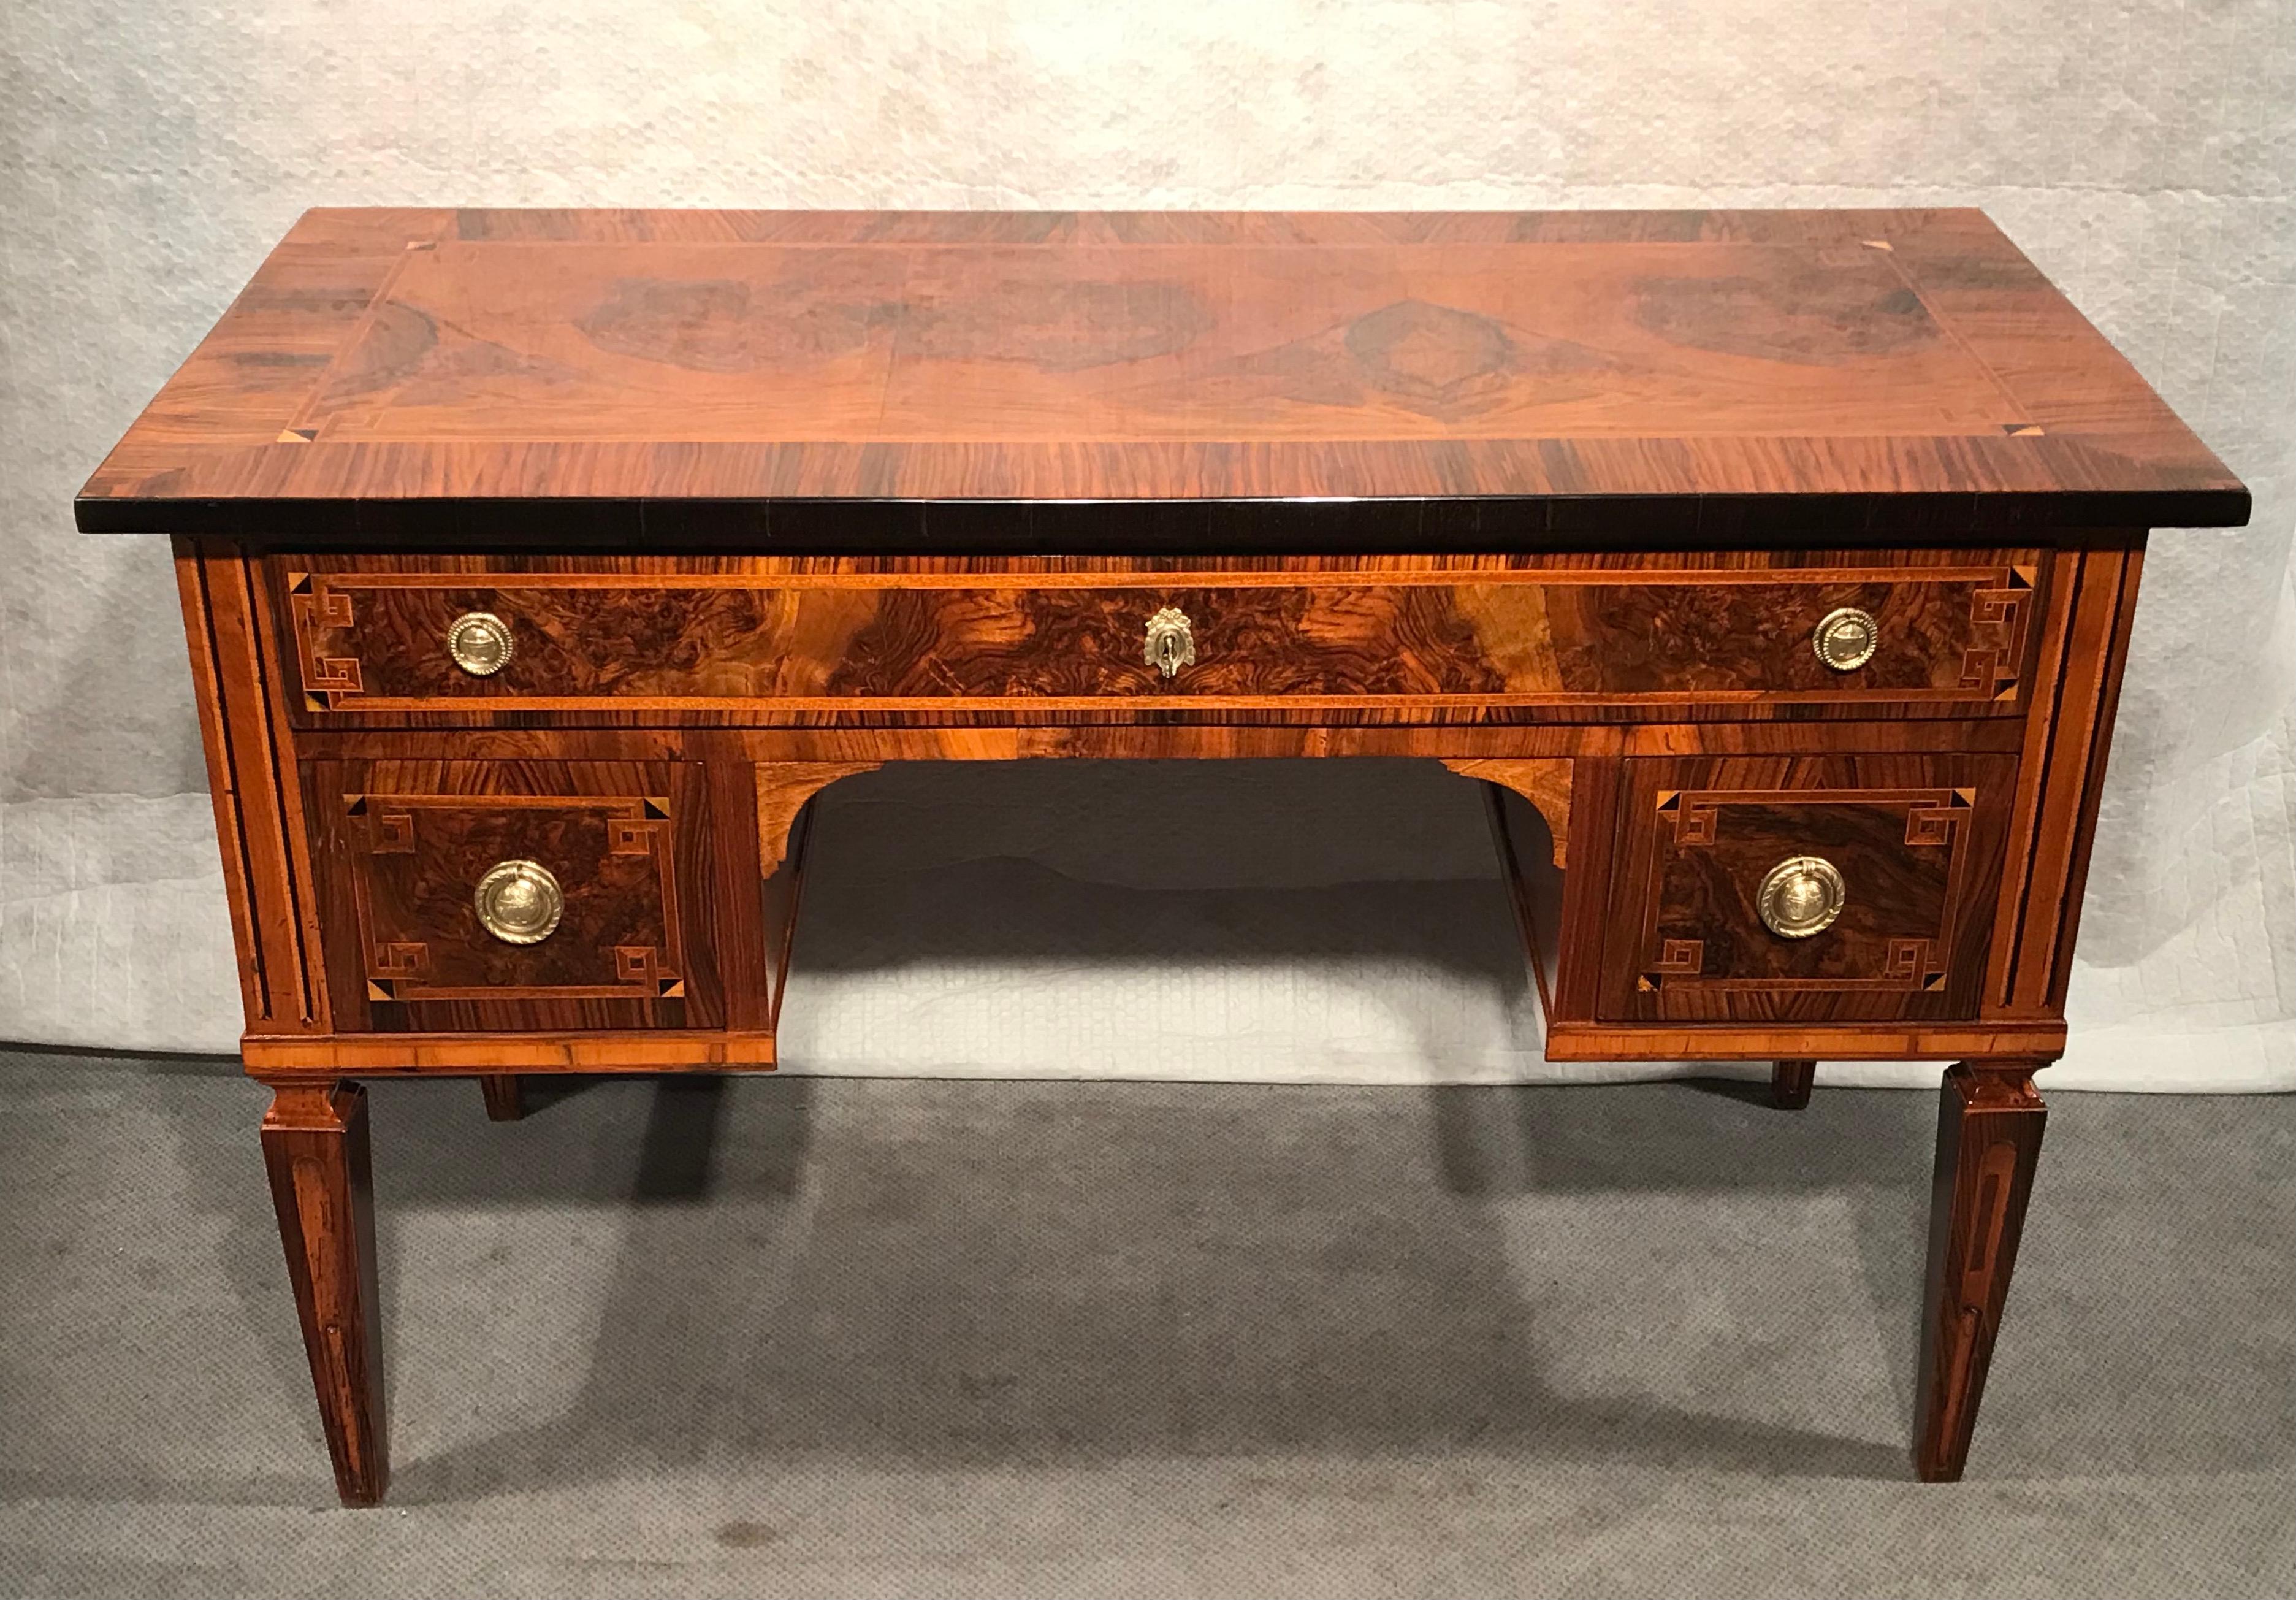 This original Louis XVI Desk stands out for its beautiful walnut veneer which is additionally embellished with intarsia. The desk stands on four tapering square legs. It has three drawers. The top has a gorgeous walnut root veneer. The back side of